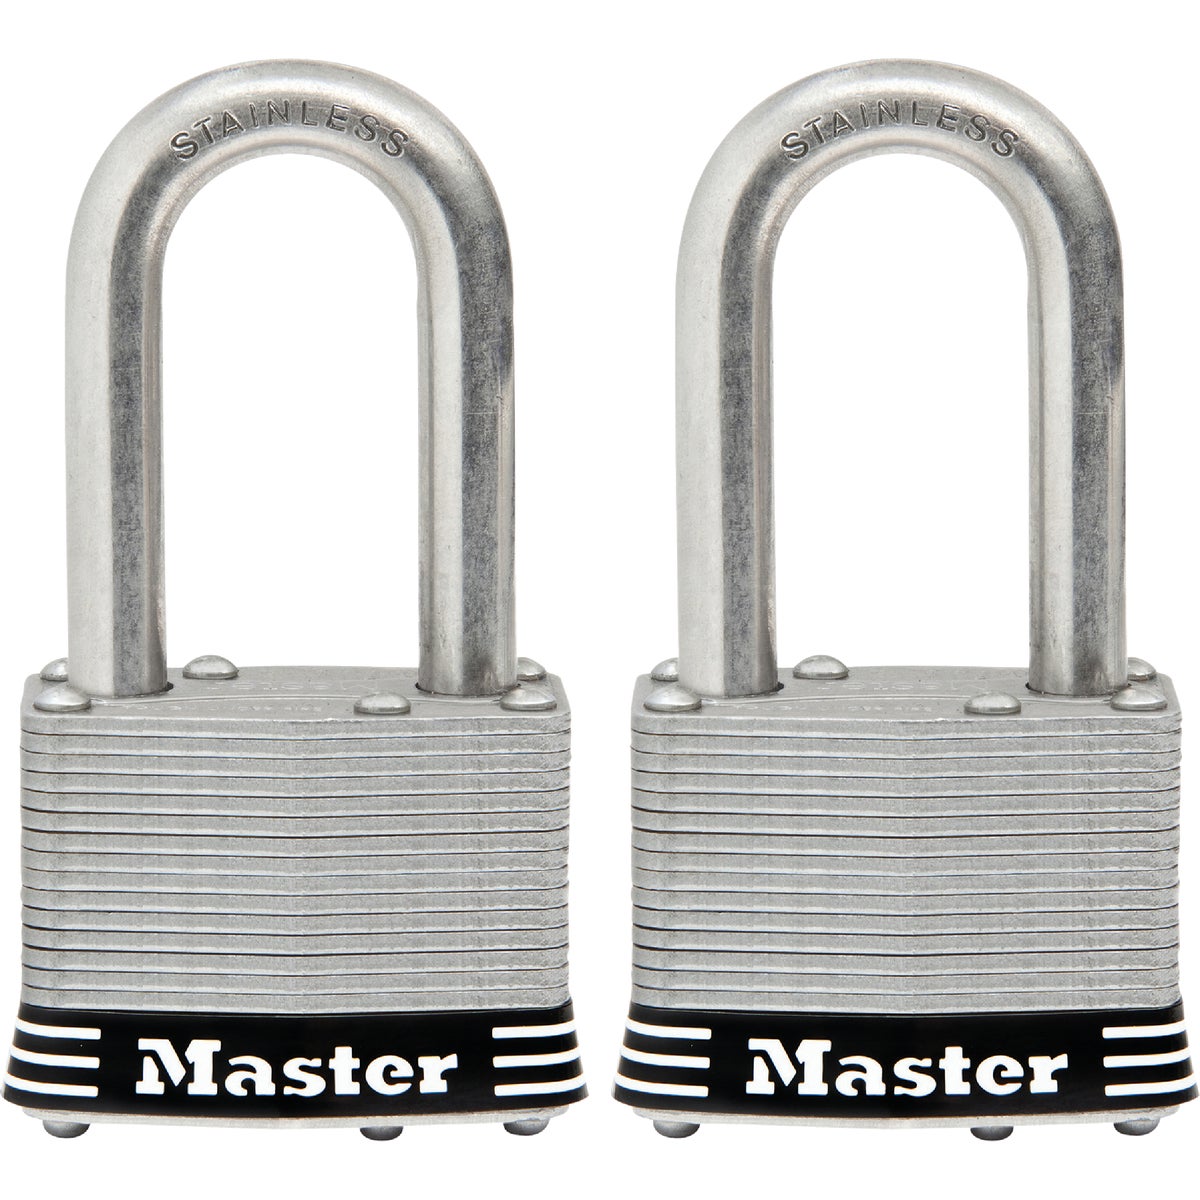 Master Lock 1-3/4 In. Laminated Stainless Steel Keyed Padlock with 1-1/2 In. Shackle (2-Pack)